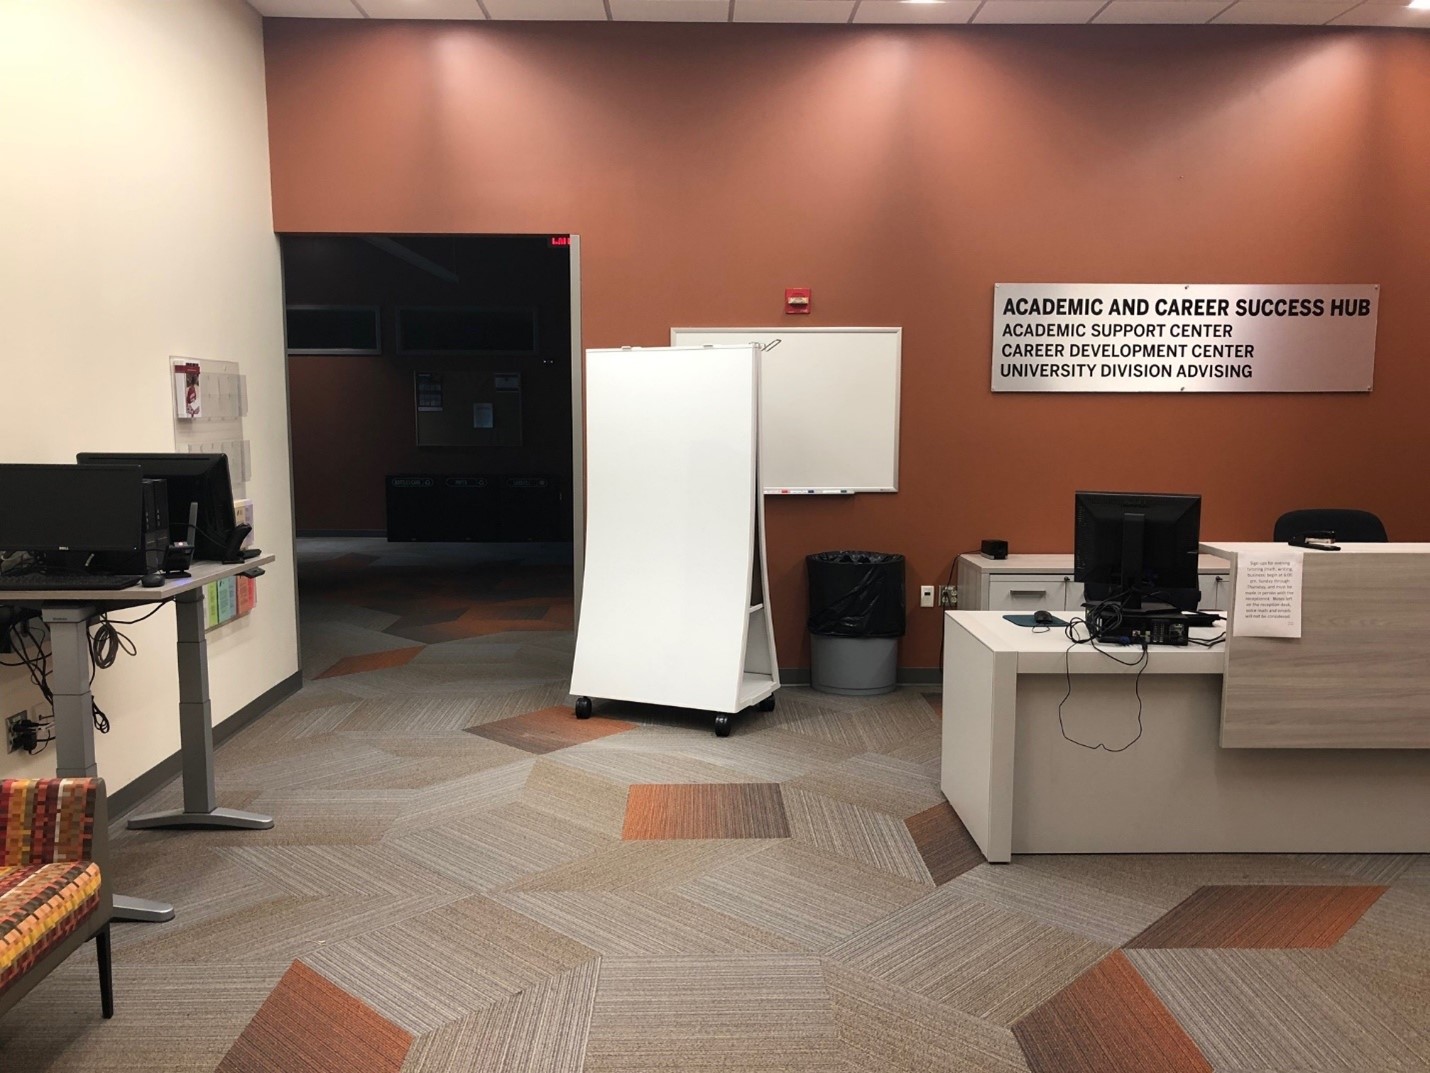 Academic and Career Success Hub lobby. There is a check-in desk in the center of the room.